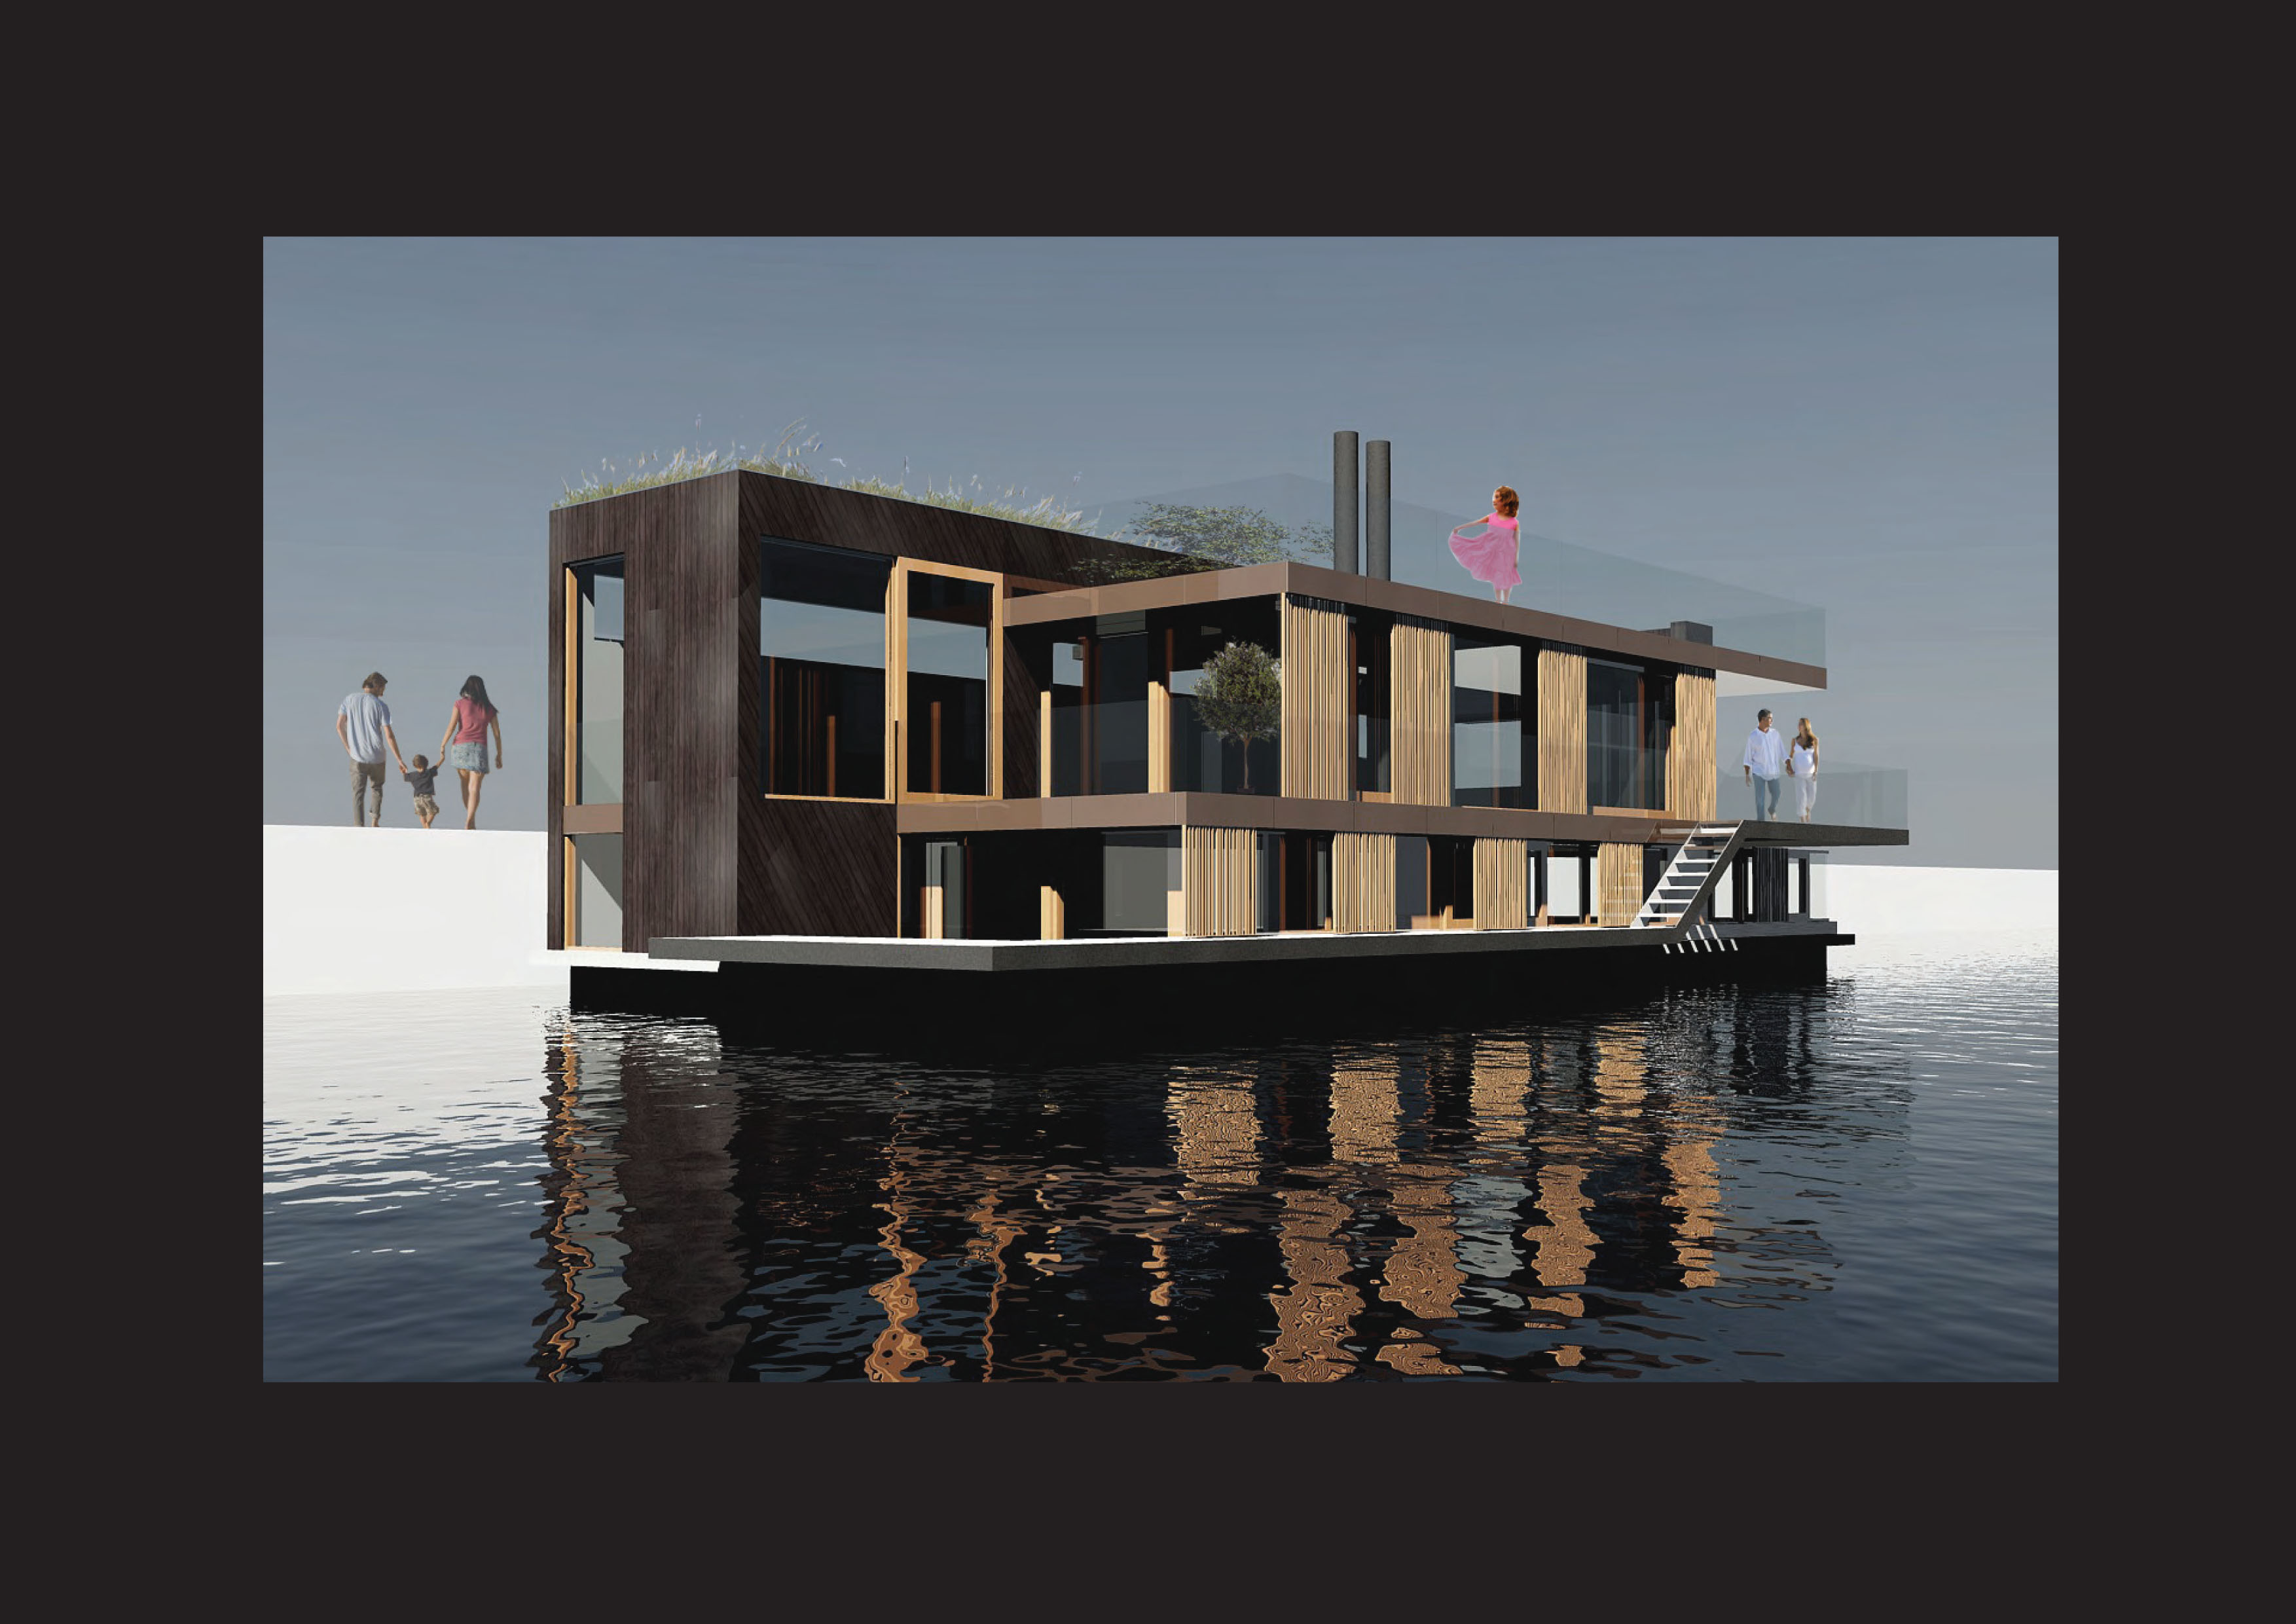 Floating home by Dirkmarine / House on Water Ltd. - concrete hull HUBB